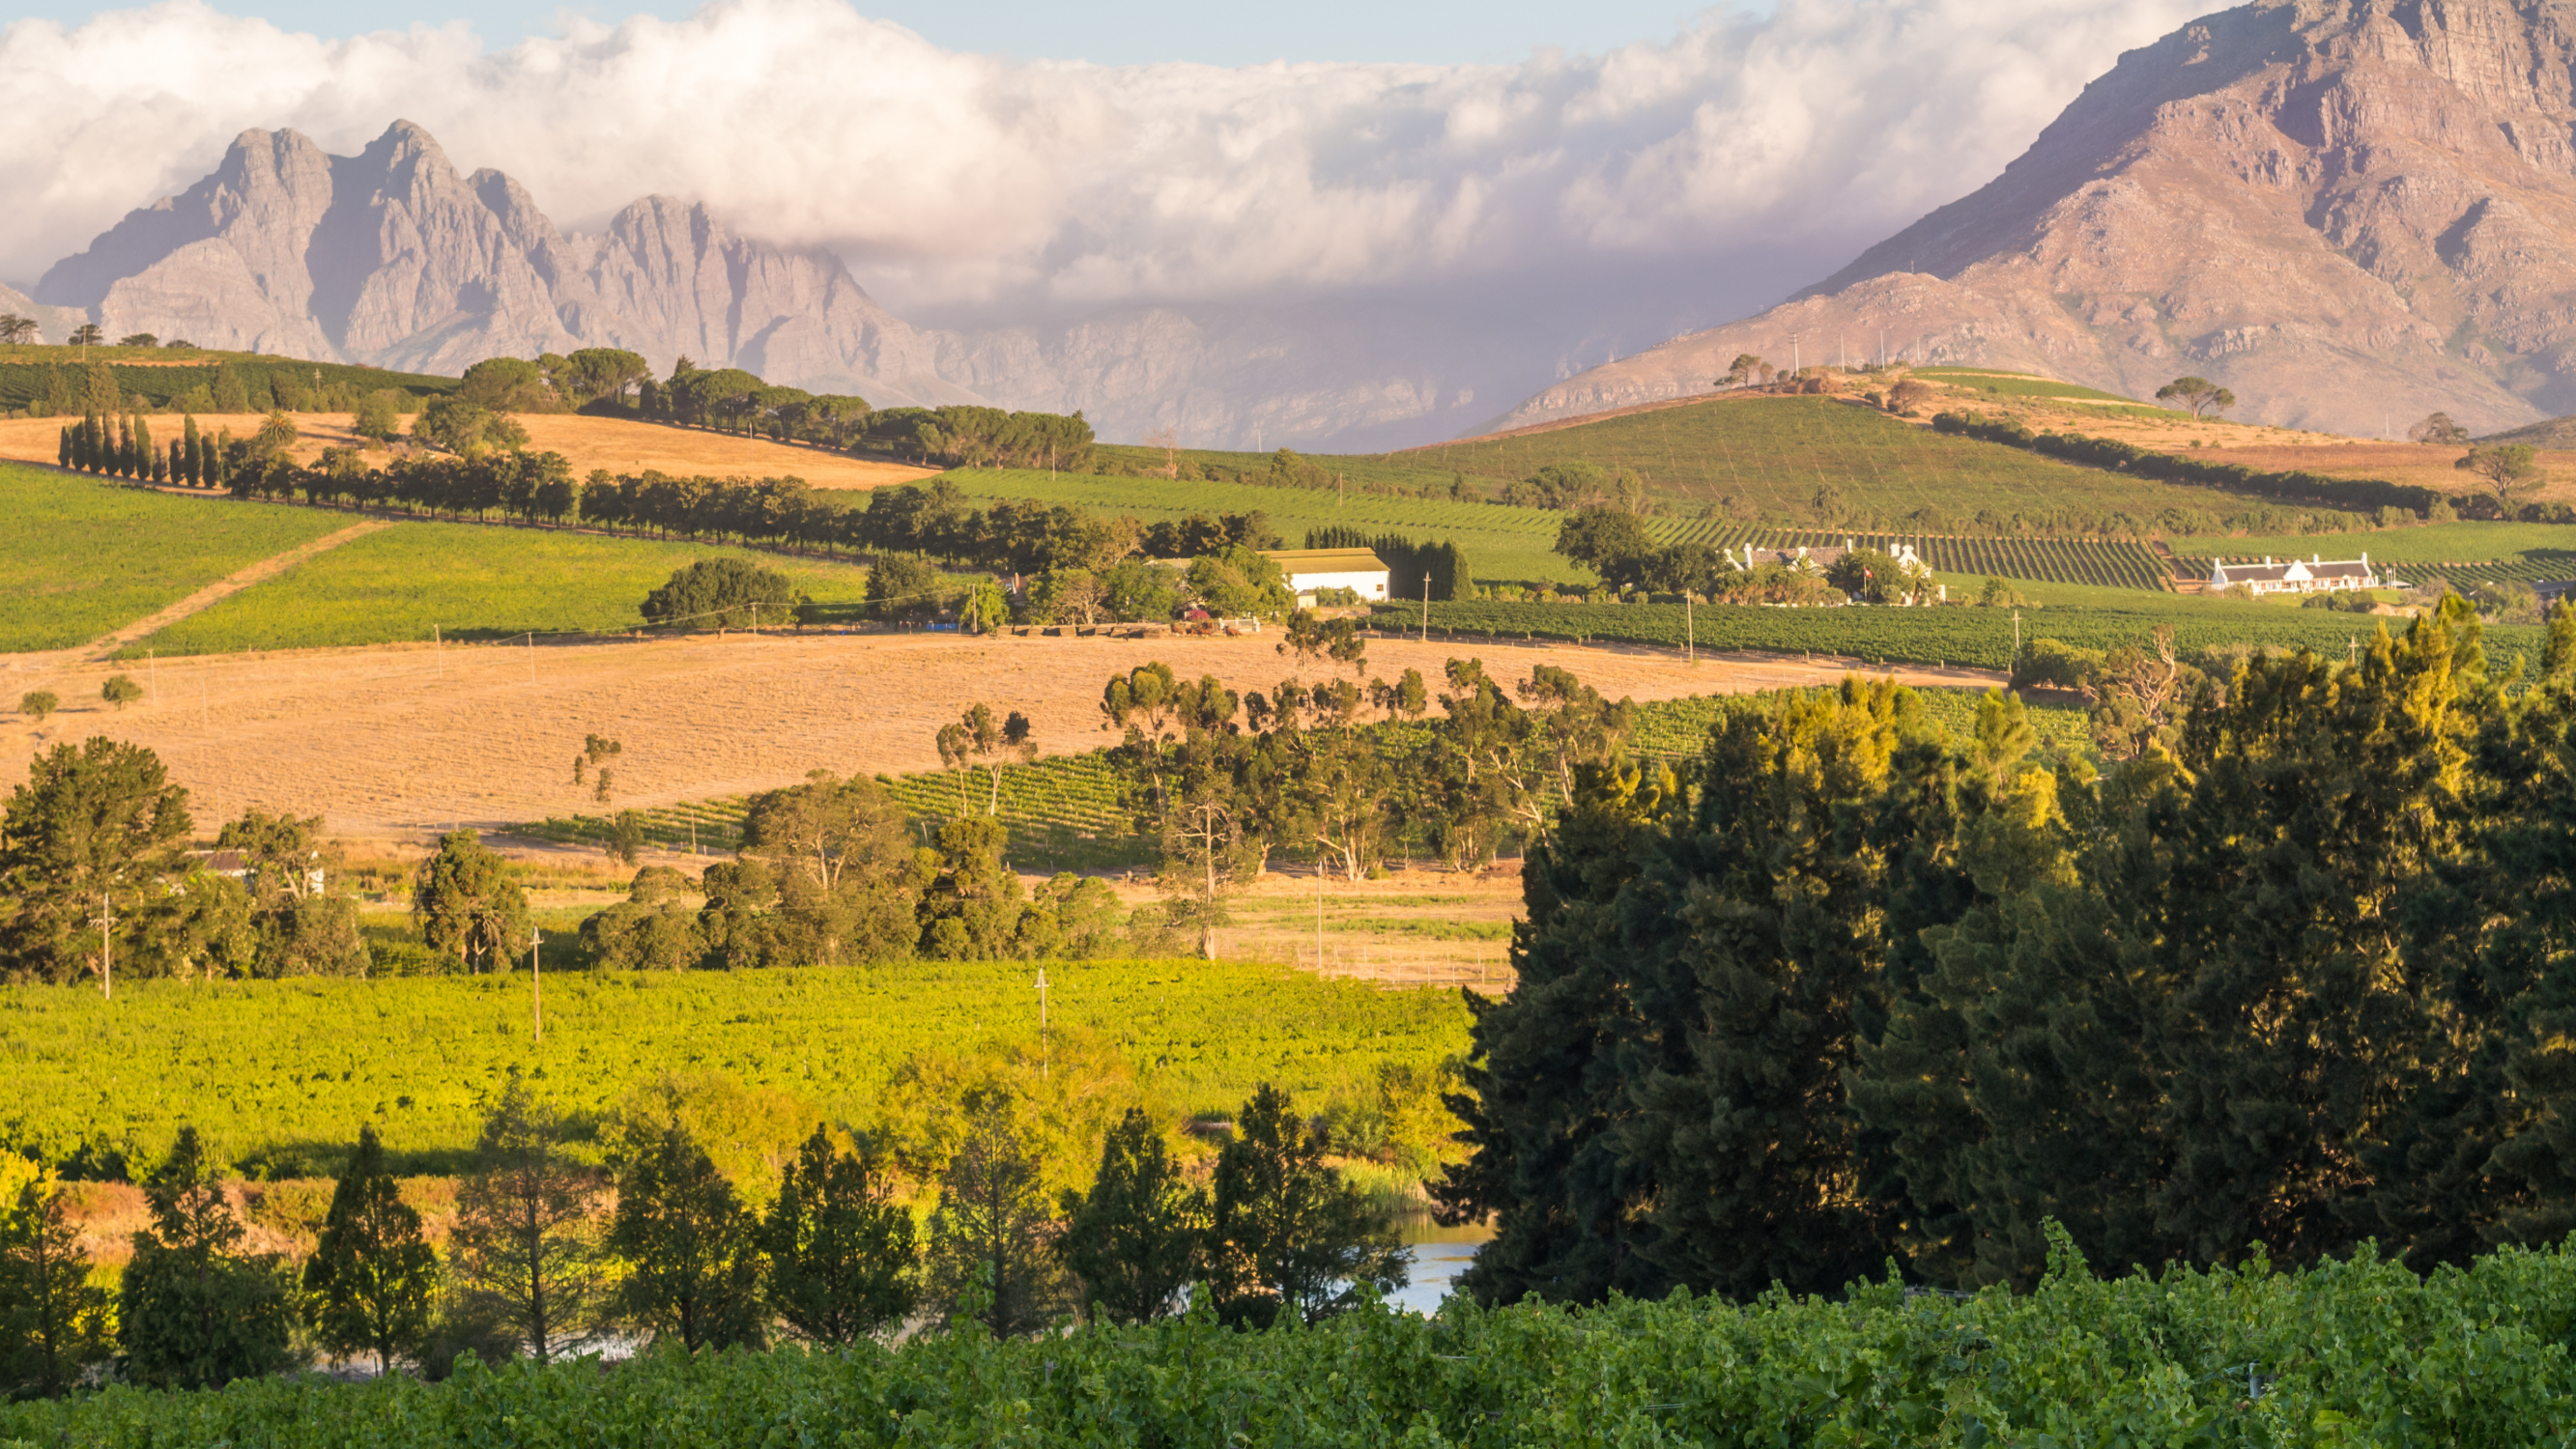 Cape-winelands-accomodation-tour-operator-cape-town-into-tours-groot-constantia-city-sightseeing-constantia-valley-paarl-wine-pairing-franschhoek-western-cape-franschhoek-wine-farms-wine-estates-cape-town-wine-south-africa-stellenbosch-wine-route
Vineyards-mountains-jonkershoek-simonsig-dorp-street-university-cape-town-wine-tasting-western-cape-winelands-house-wine-farms-wine-estate-resturant-stellenbosch-accomodation-into-tours-cape-town-wine-tasting-day-tours-private-tours-cape-town-tour-guide
